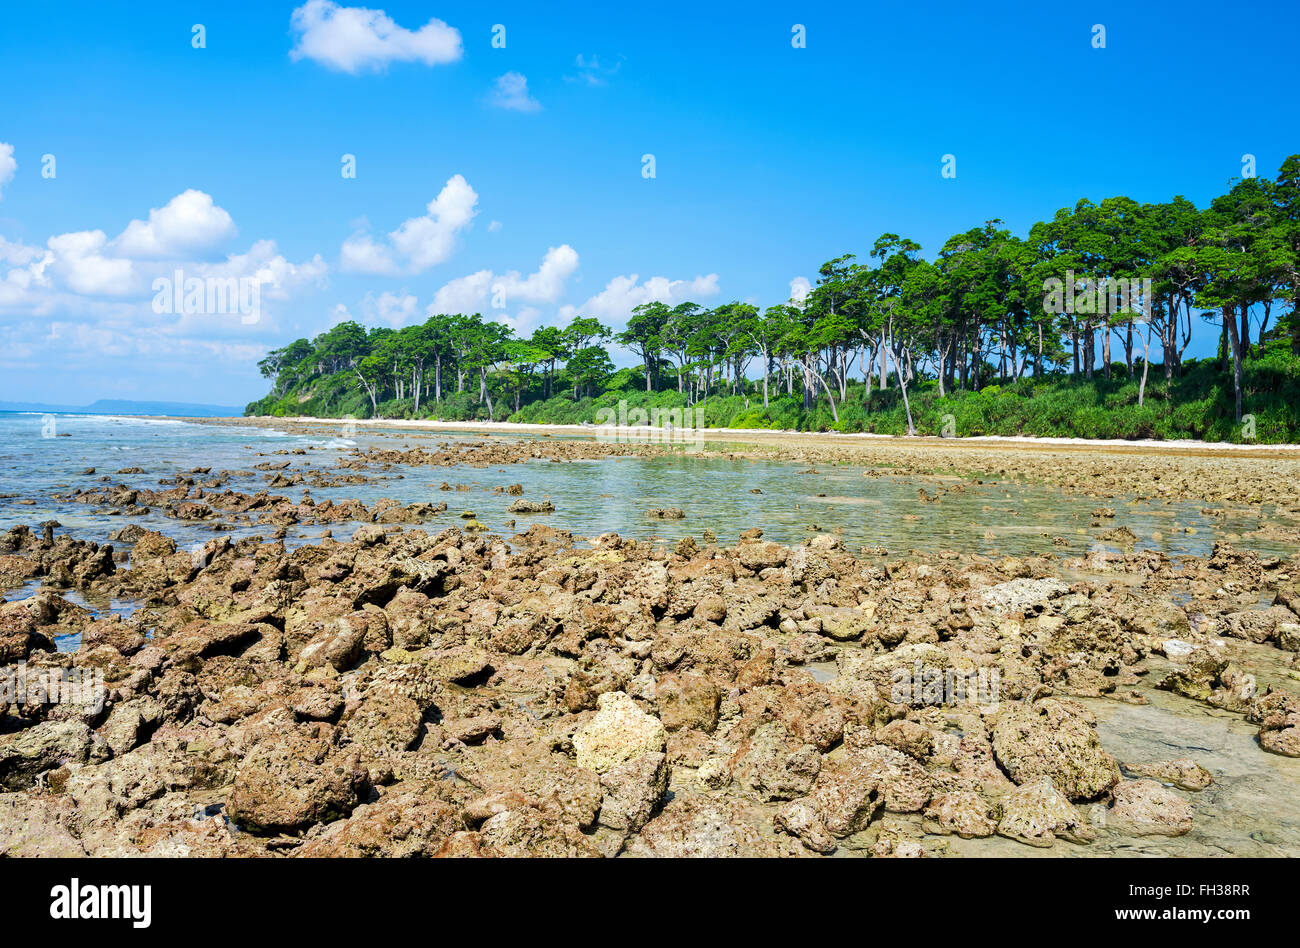 Coral rocks exposed in Neil island, Andaman, India Stock Photo